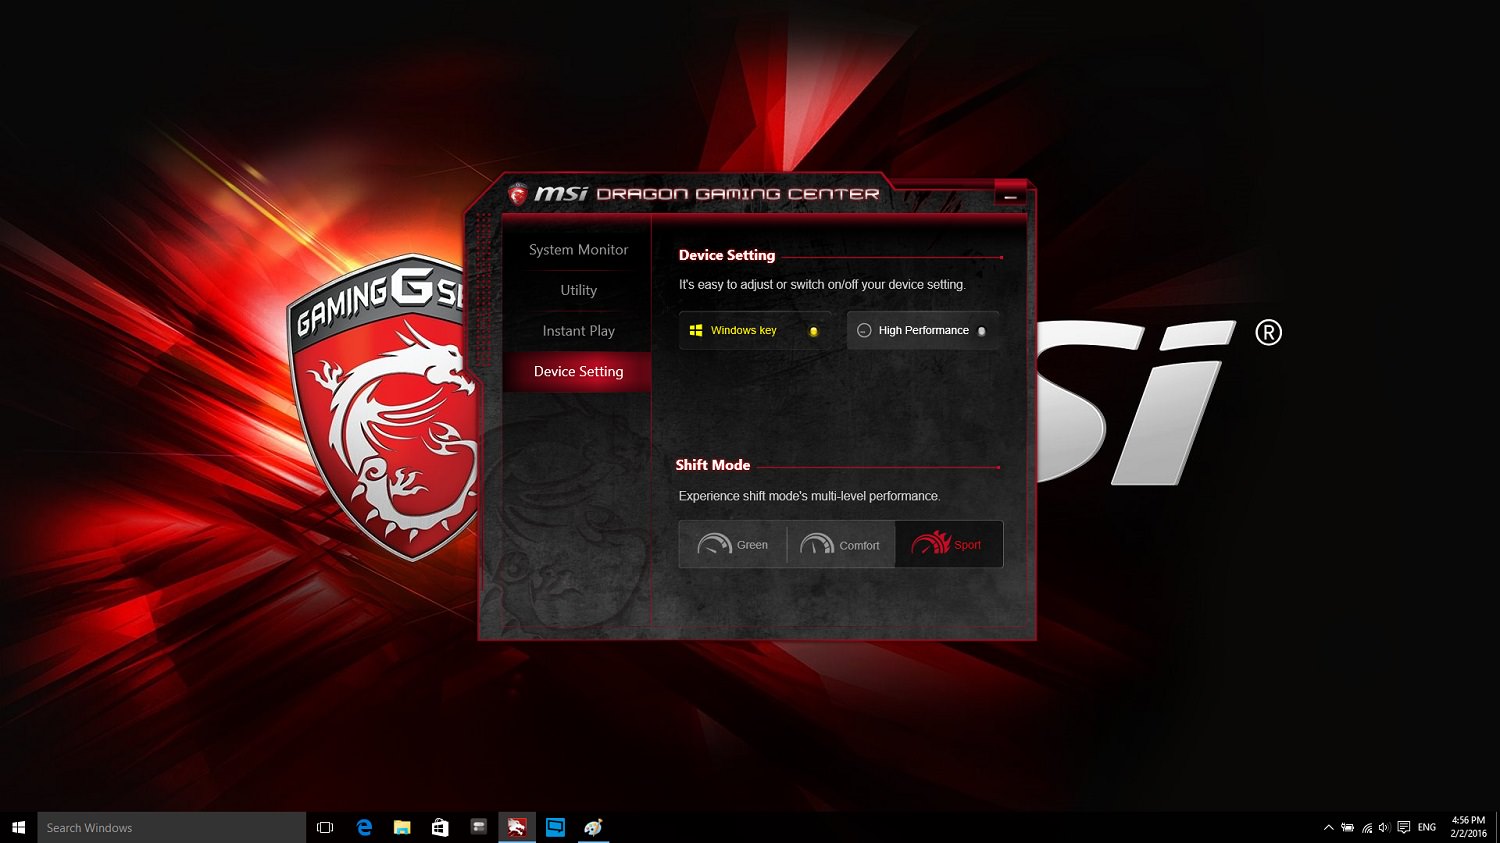  4 Zoomg MSI GT72S Daragon Gaming Center